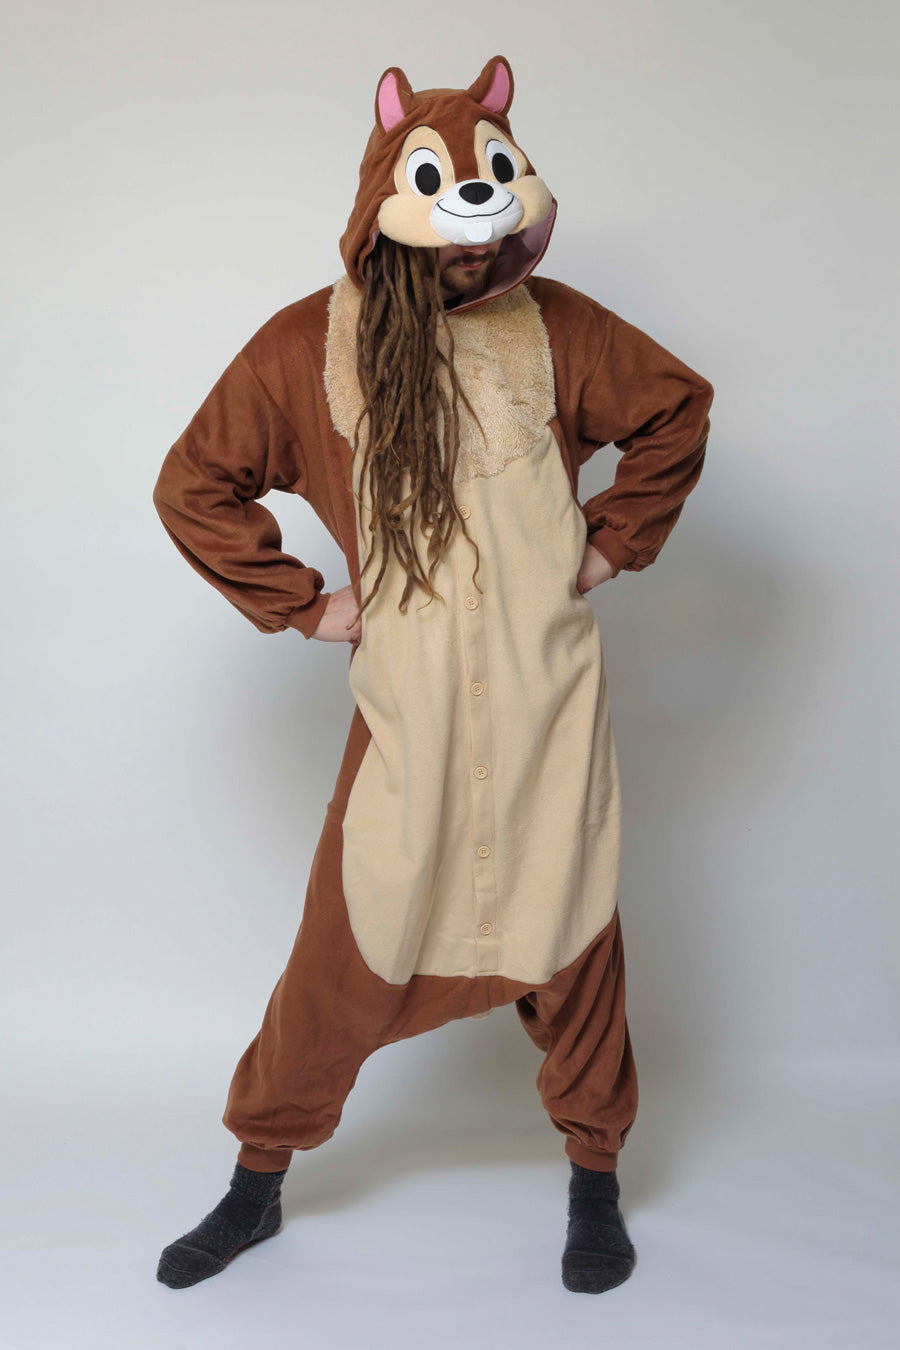 chip kigurumi posting for pictorial